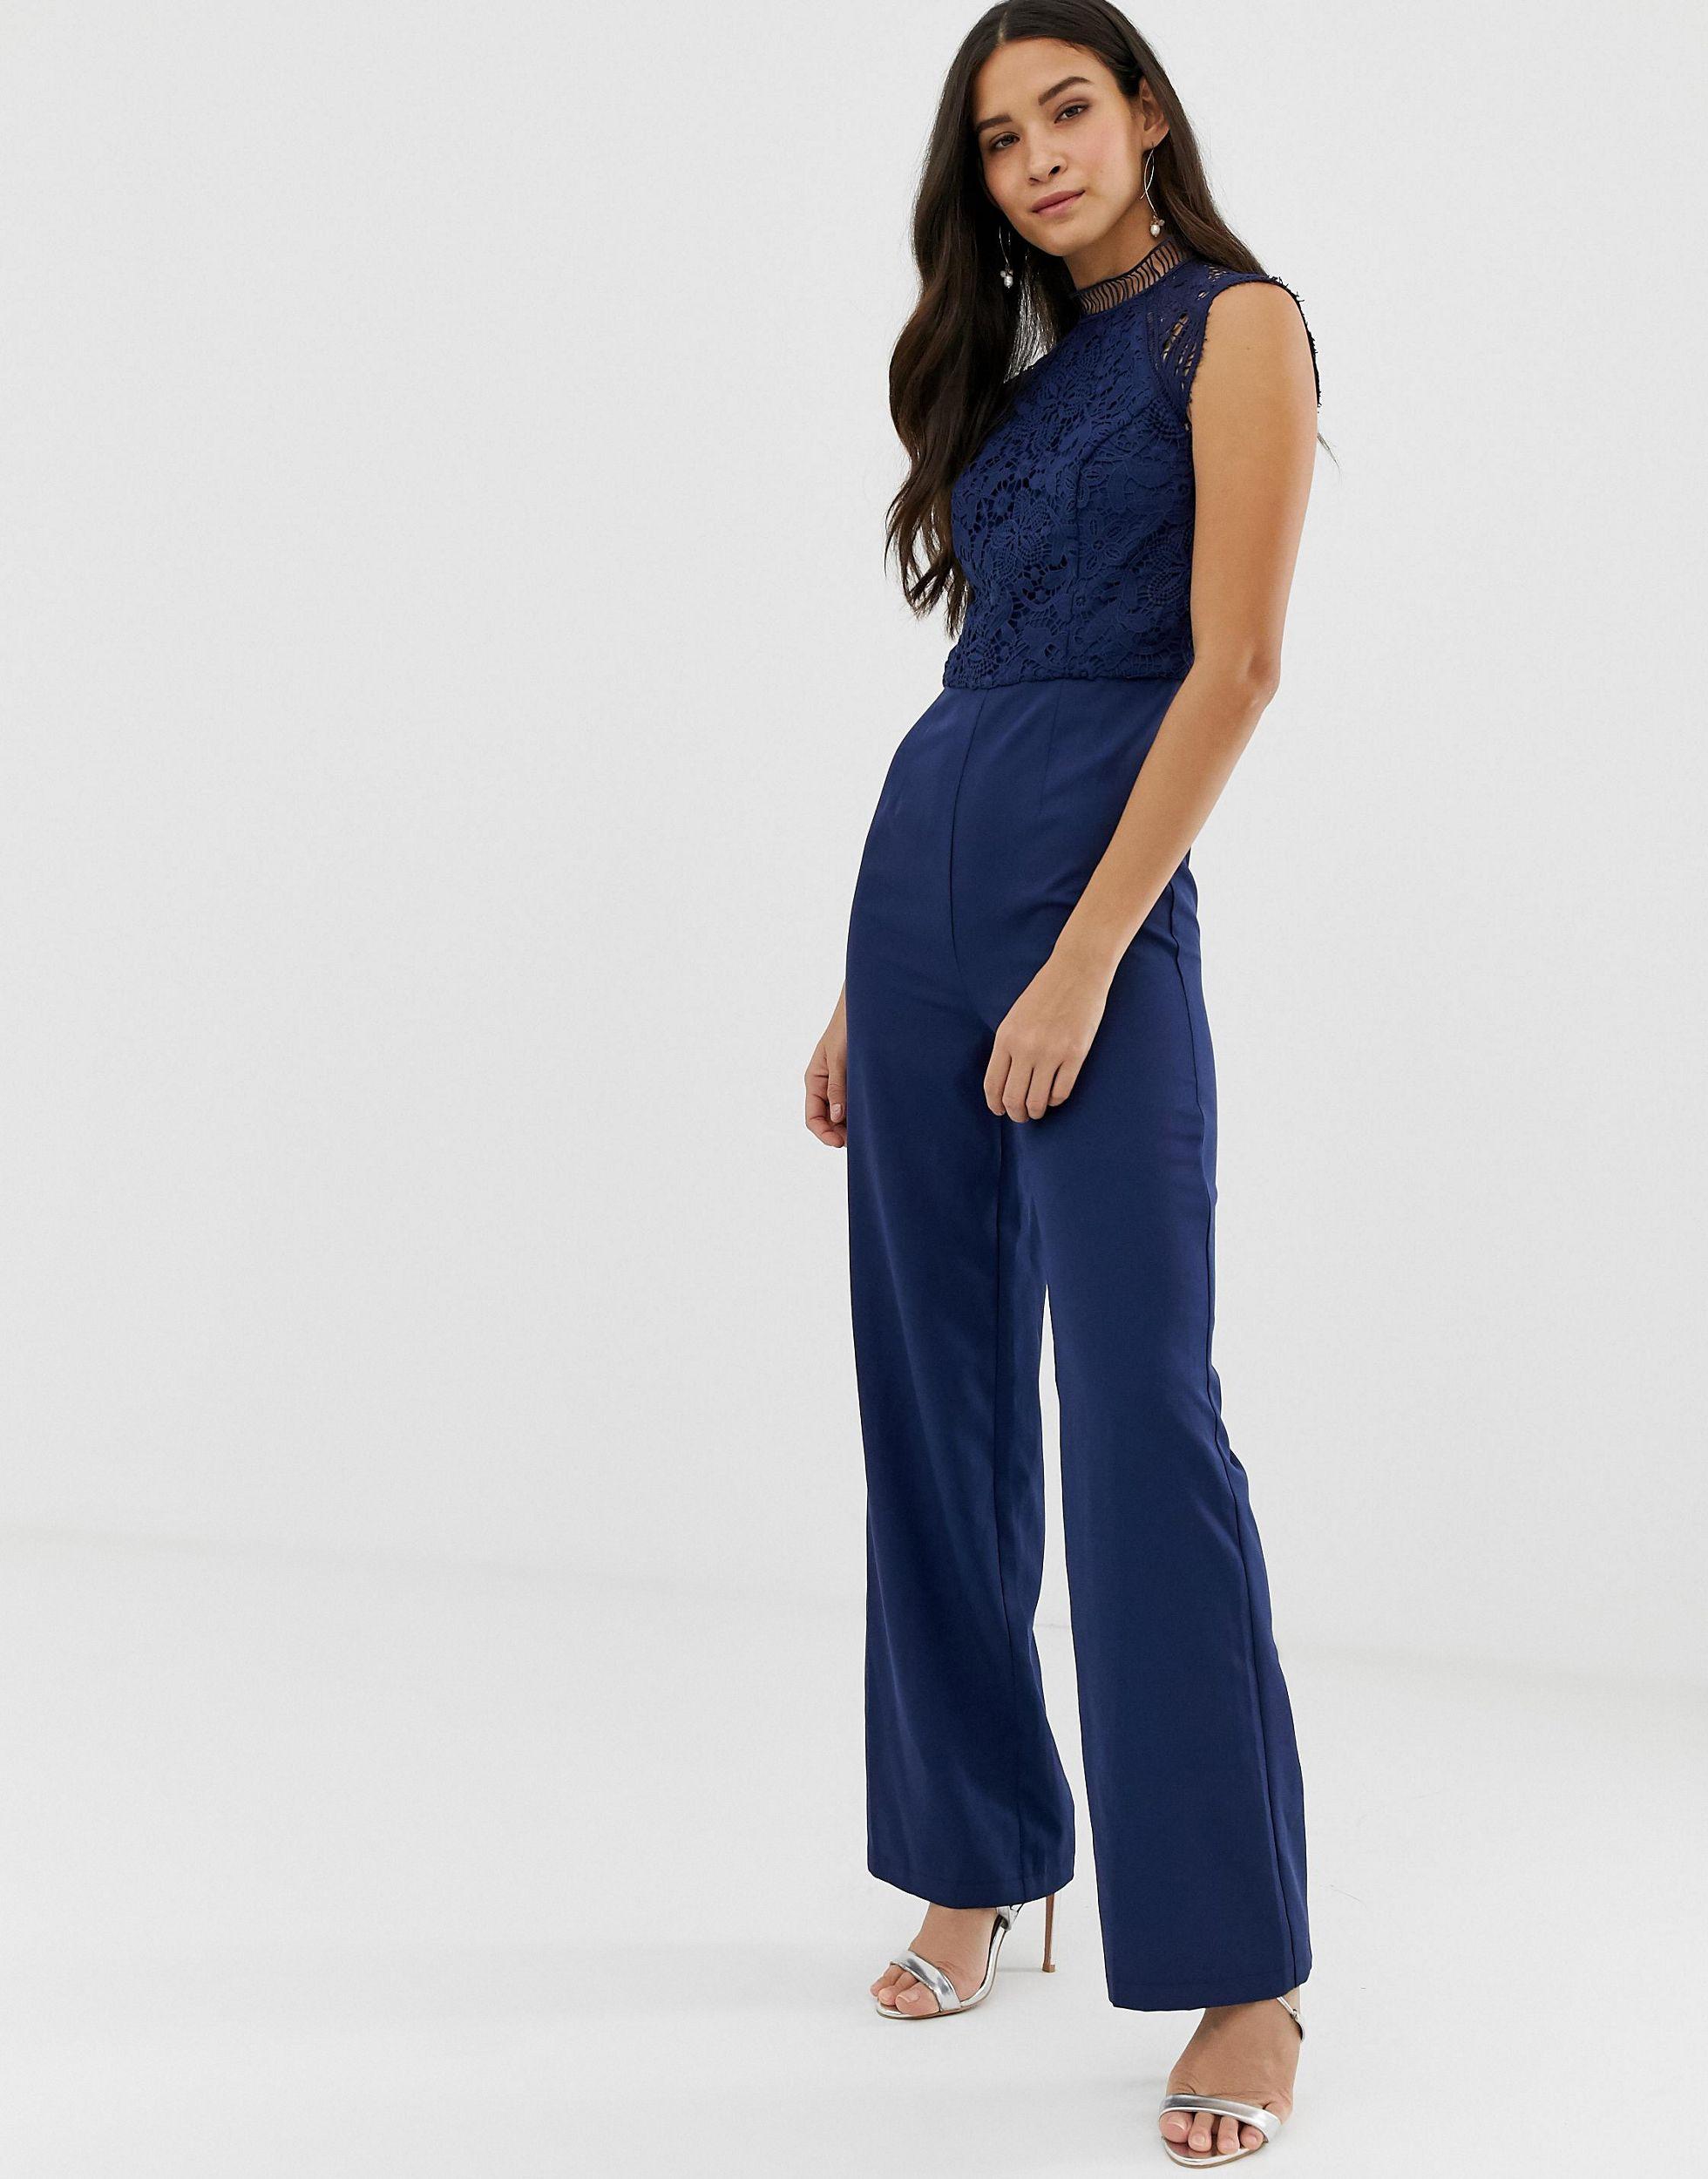 Chi Chi London 2 In 1 High Neck Lace Jumpsuit In Navy in Blue - Lyst